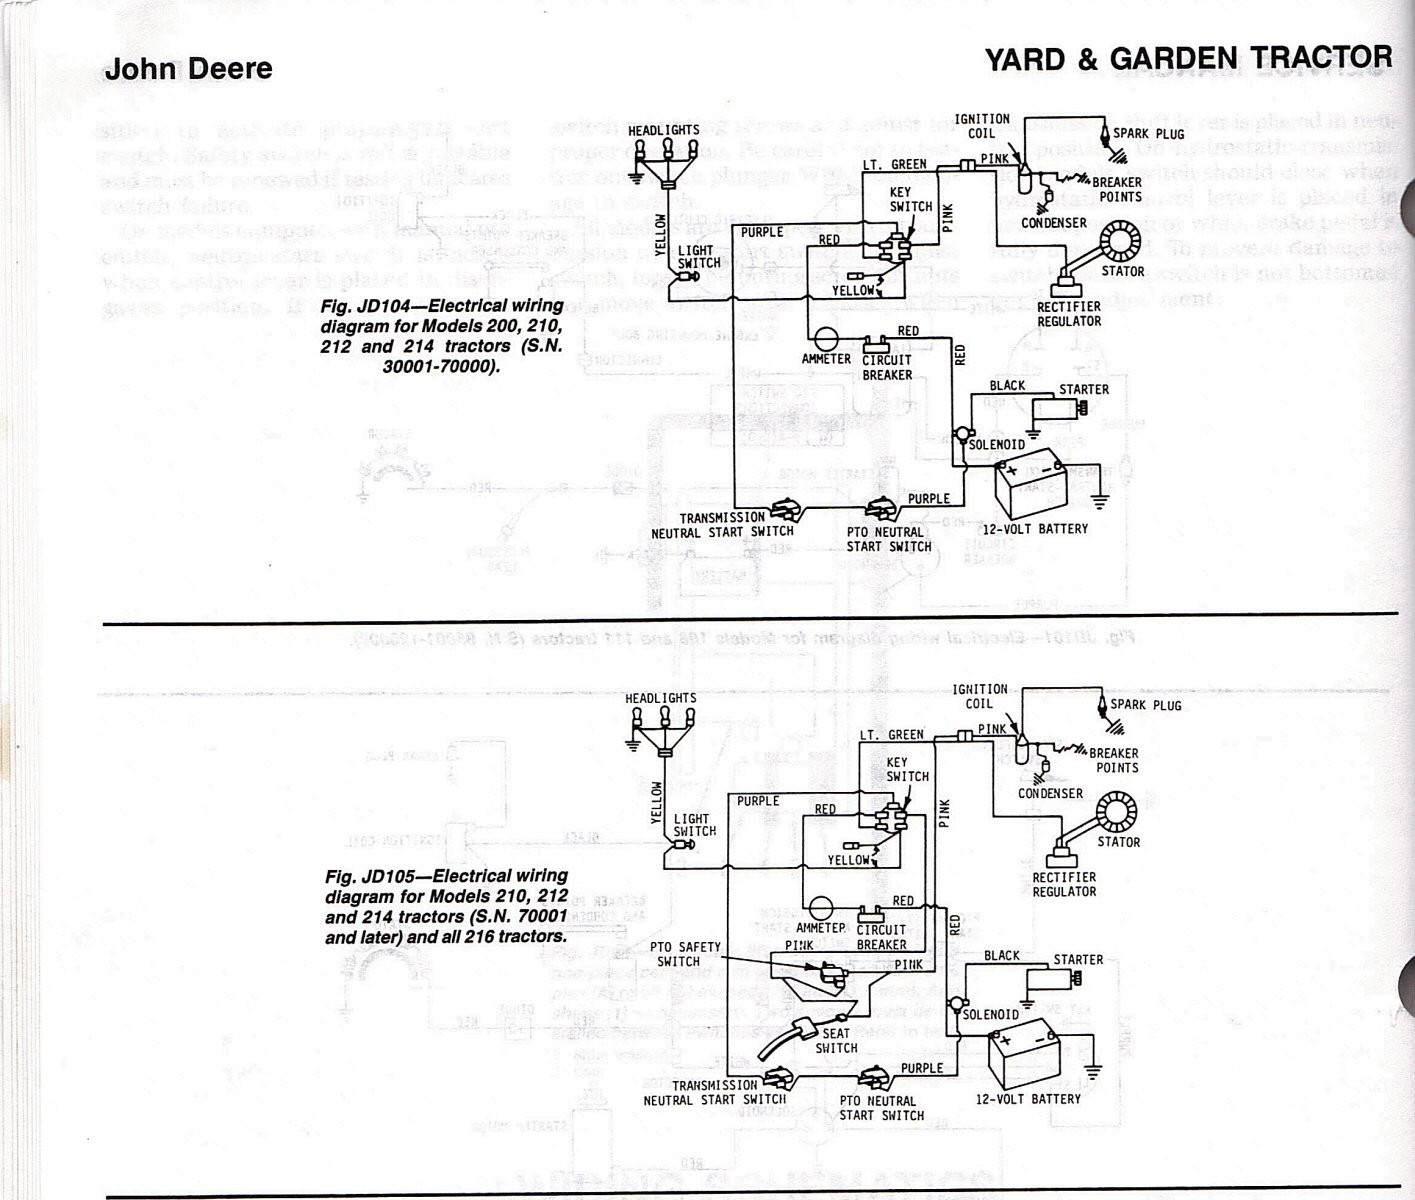 John Deere Electrical Schematic How Can I See A Wiring Diagram for A Deere Model 212 Of John Deere Electrical Schematic